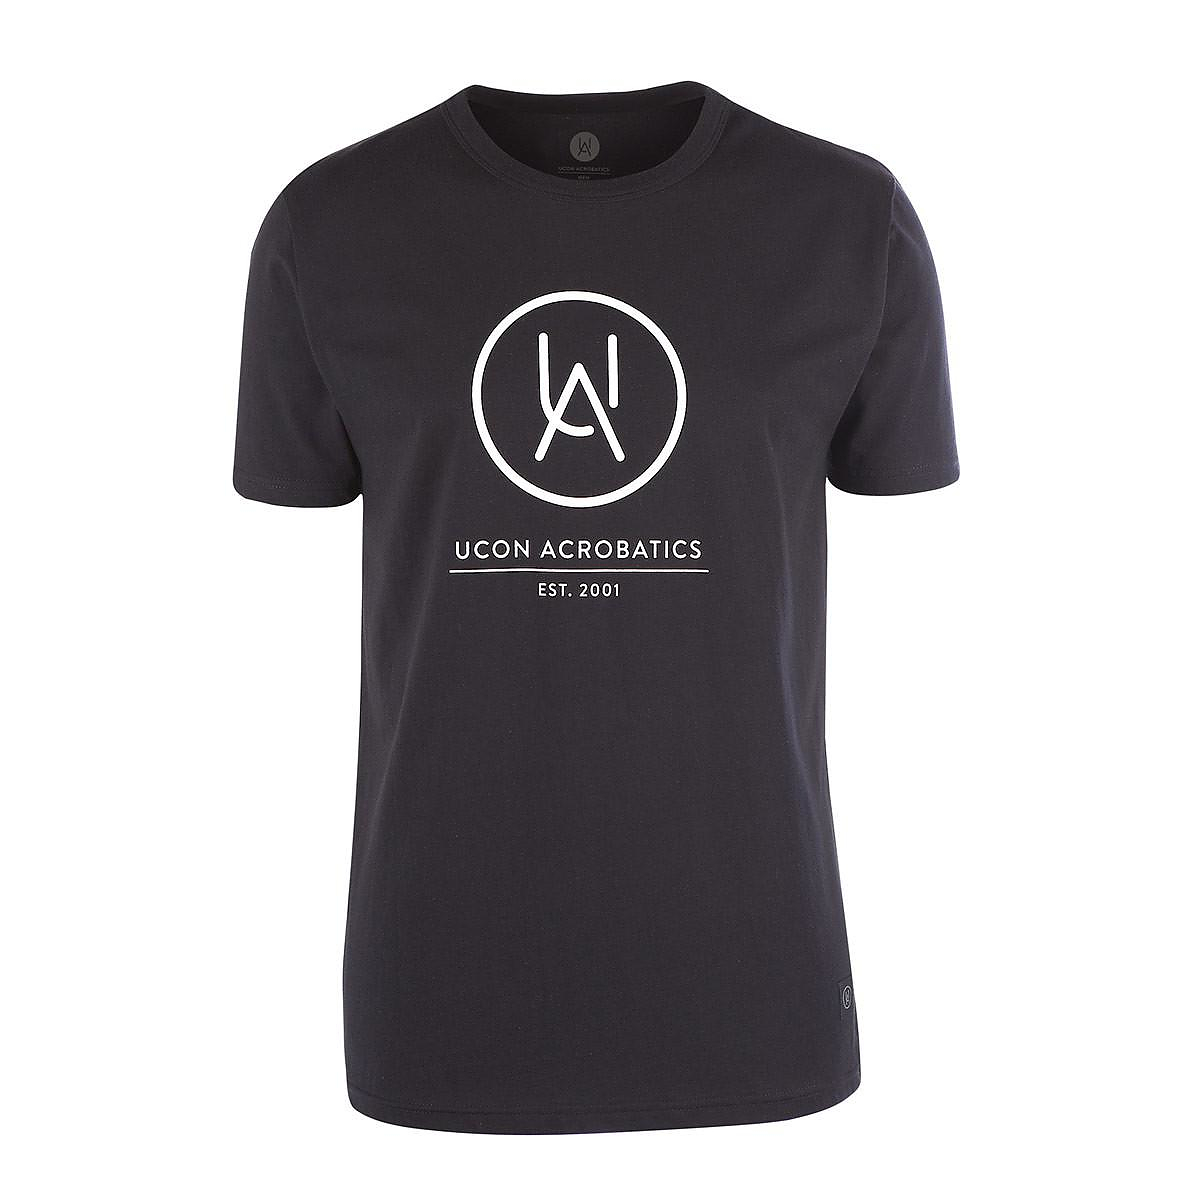 Minimal modern T Shirts by Ucon Acrobatics Design Is This